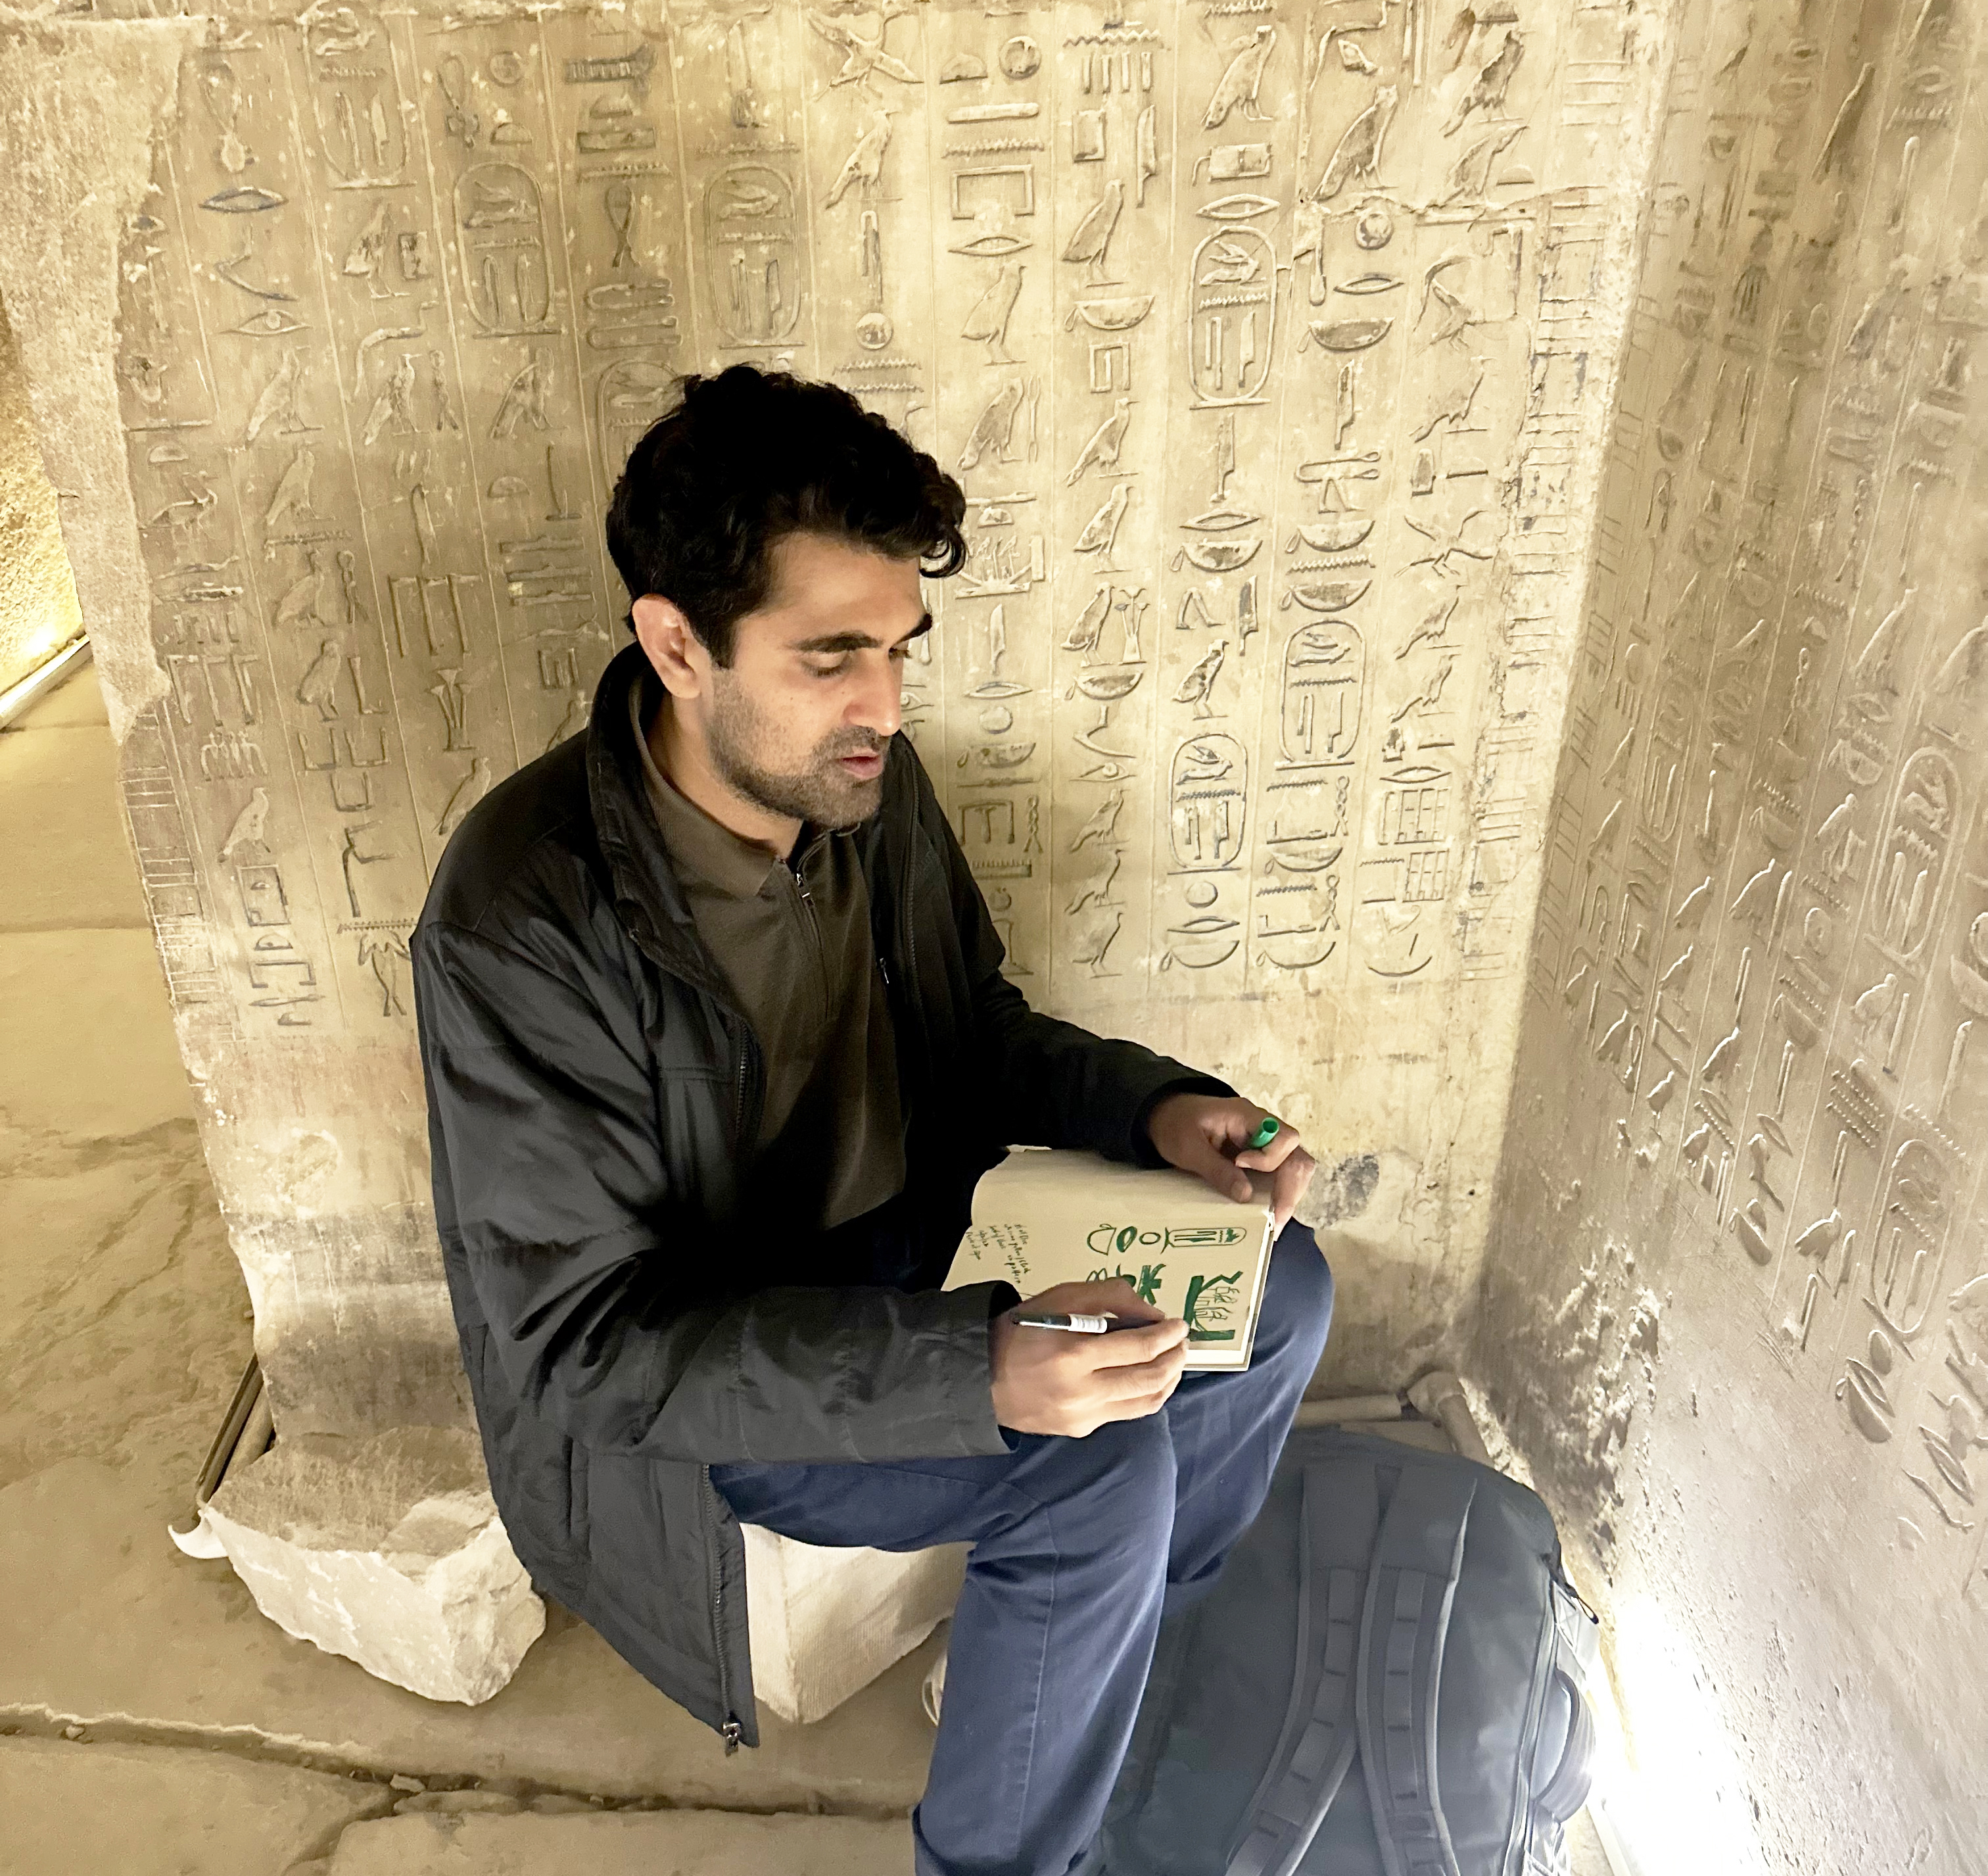 Mithani sketching inside an Egyptian tomb